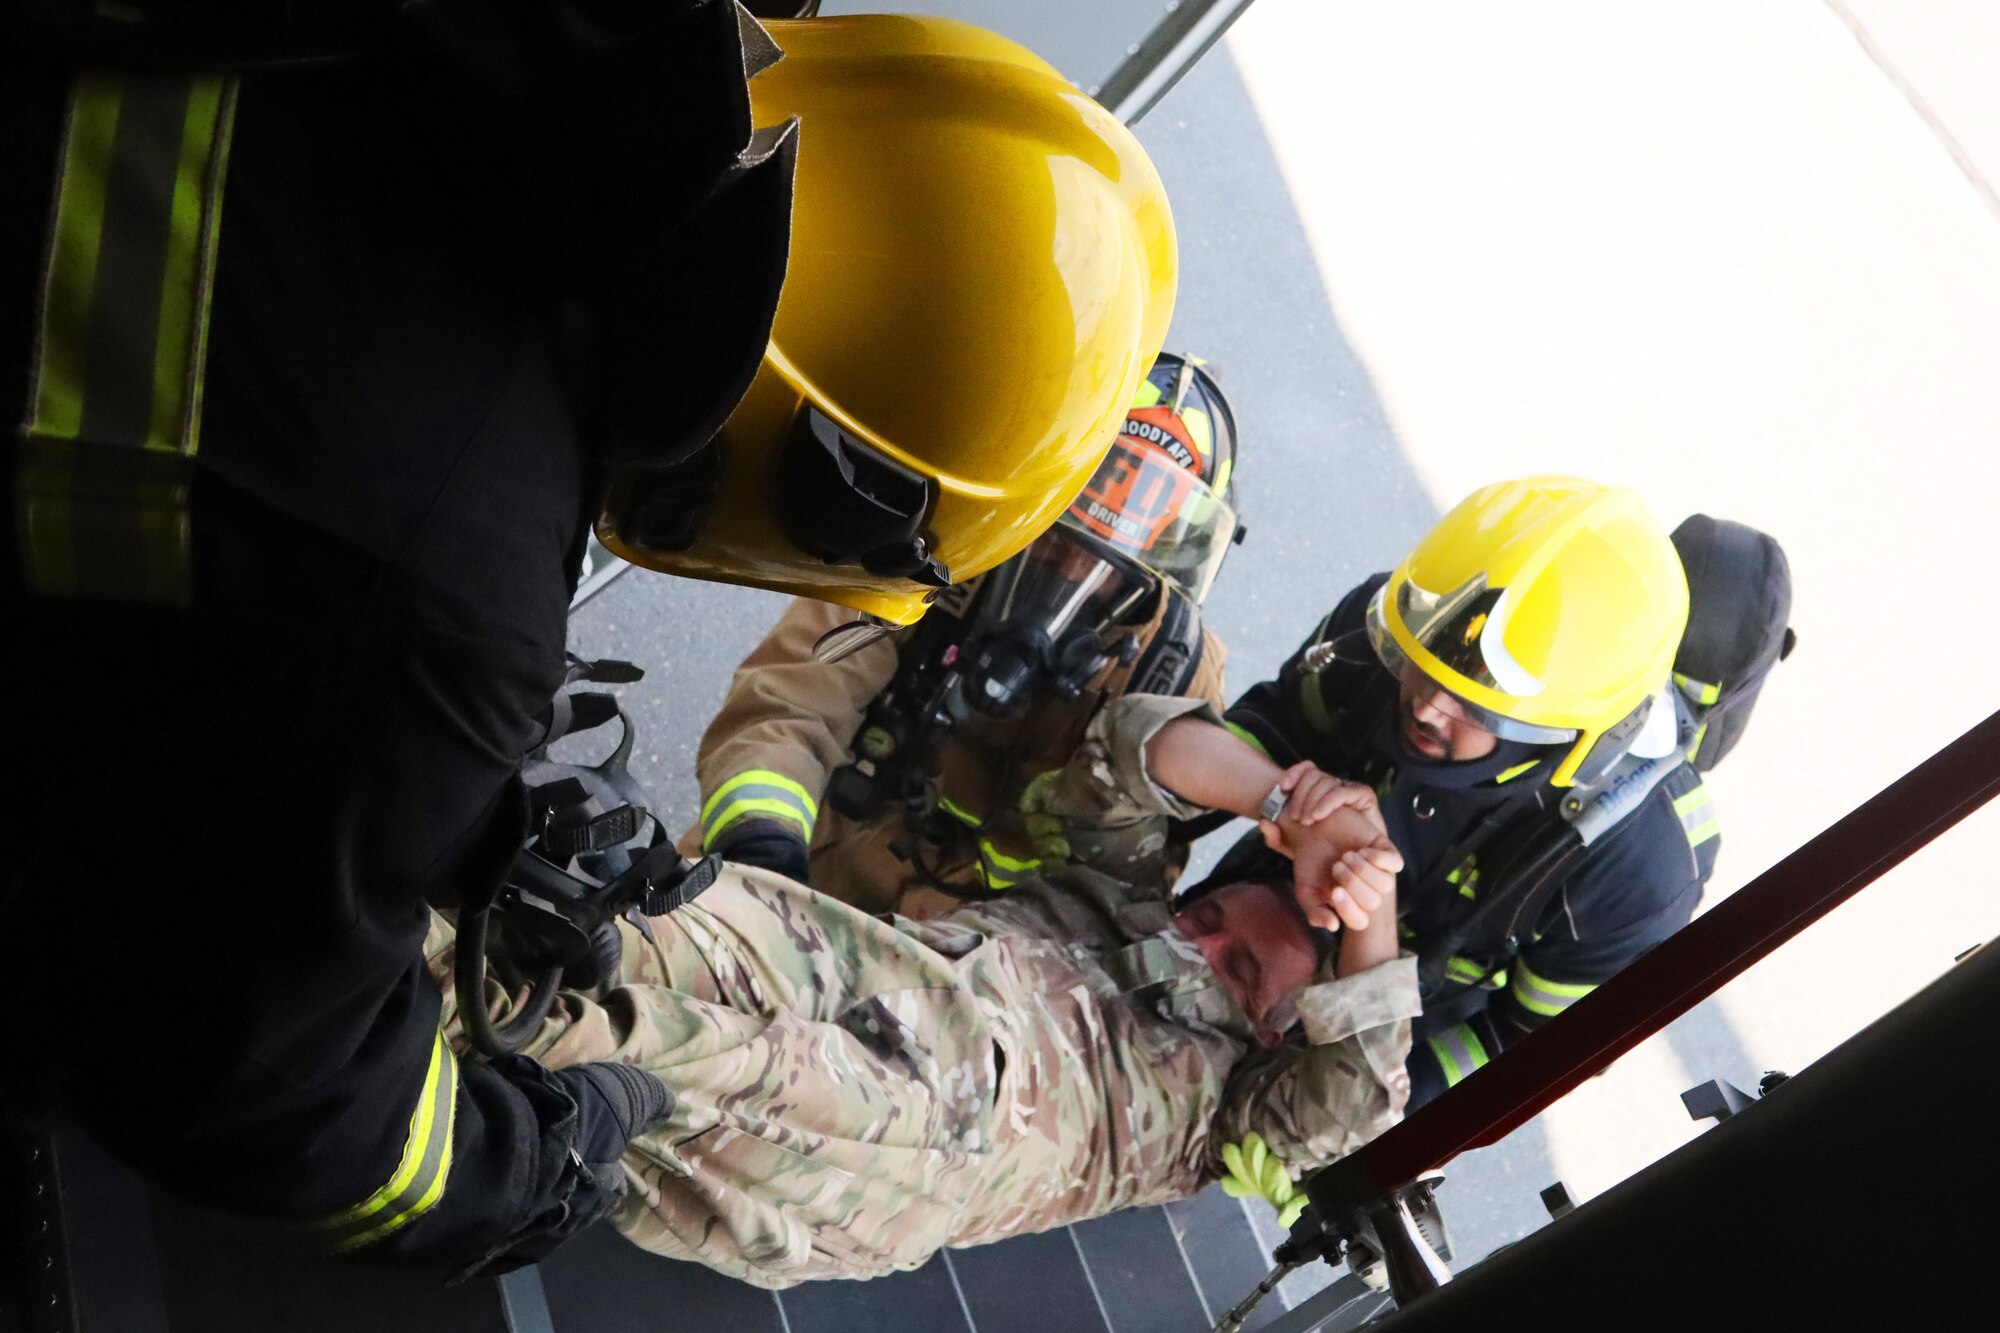 Firefighters from the 379th Expeditionary Civil Engineer Squadron and Qatar Emiri Air Force move a simulated patient from a Royal Air Force A400m Atlas aircraft during a major accident response exercise at Al Udeid Air Base, Qatar on Nov. 12, 2019. The MARE was developed by U.S. Air Force and Royal Air Force planners in order to increase coalition partner interoperability during an emergency situation.(U.S. Air Force photo by Tech. Sgt Ian Dean)